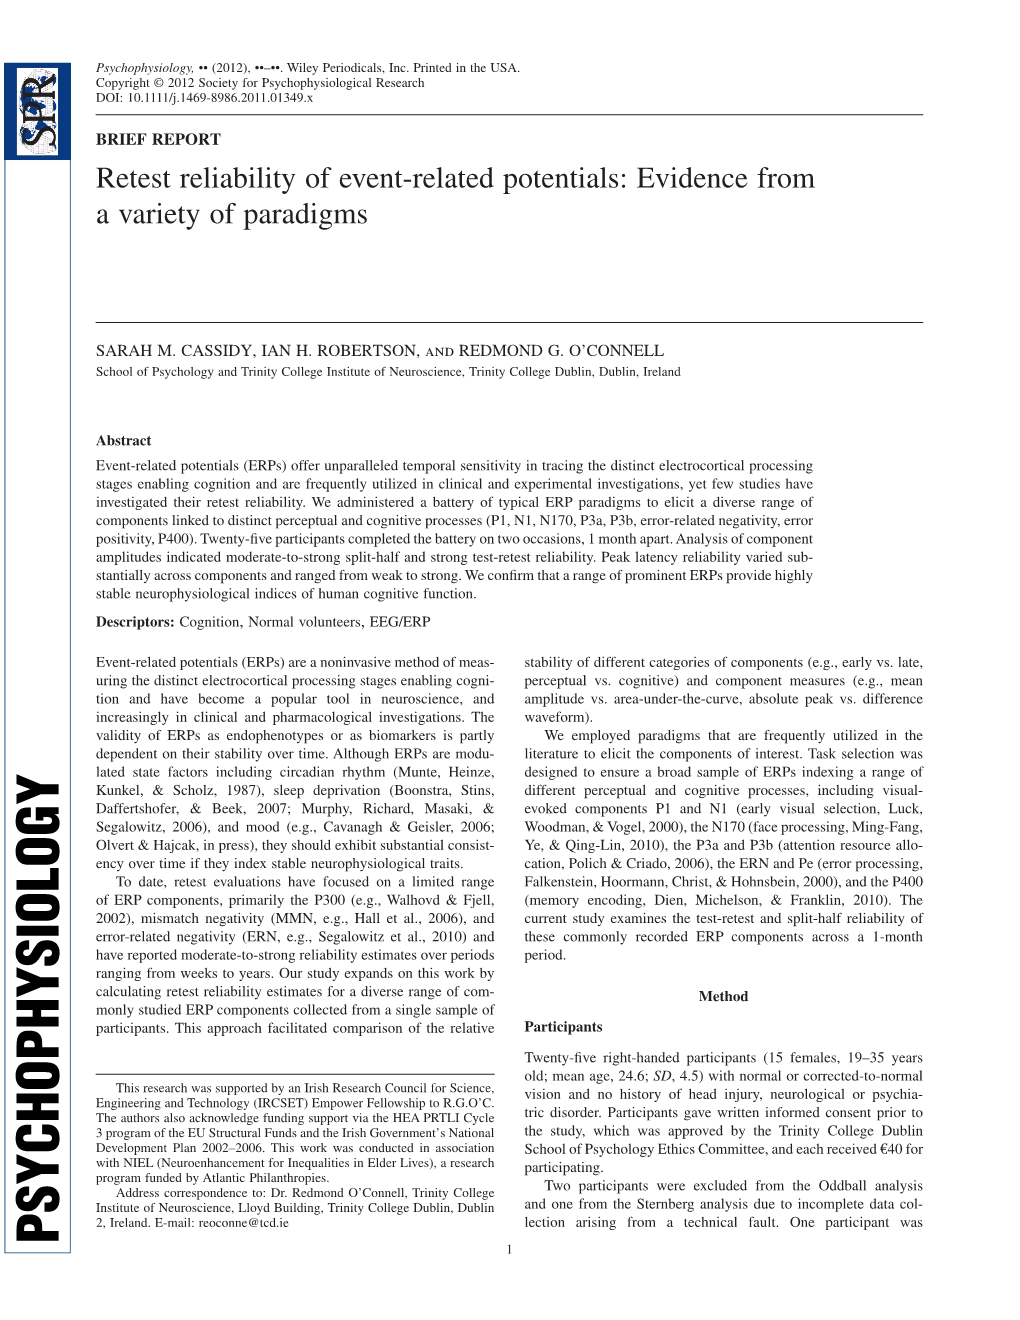 Retest Reliability of Eventrelated Potentials: Evidence from a Variety of Paradigms